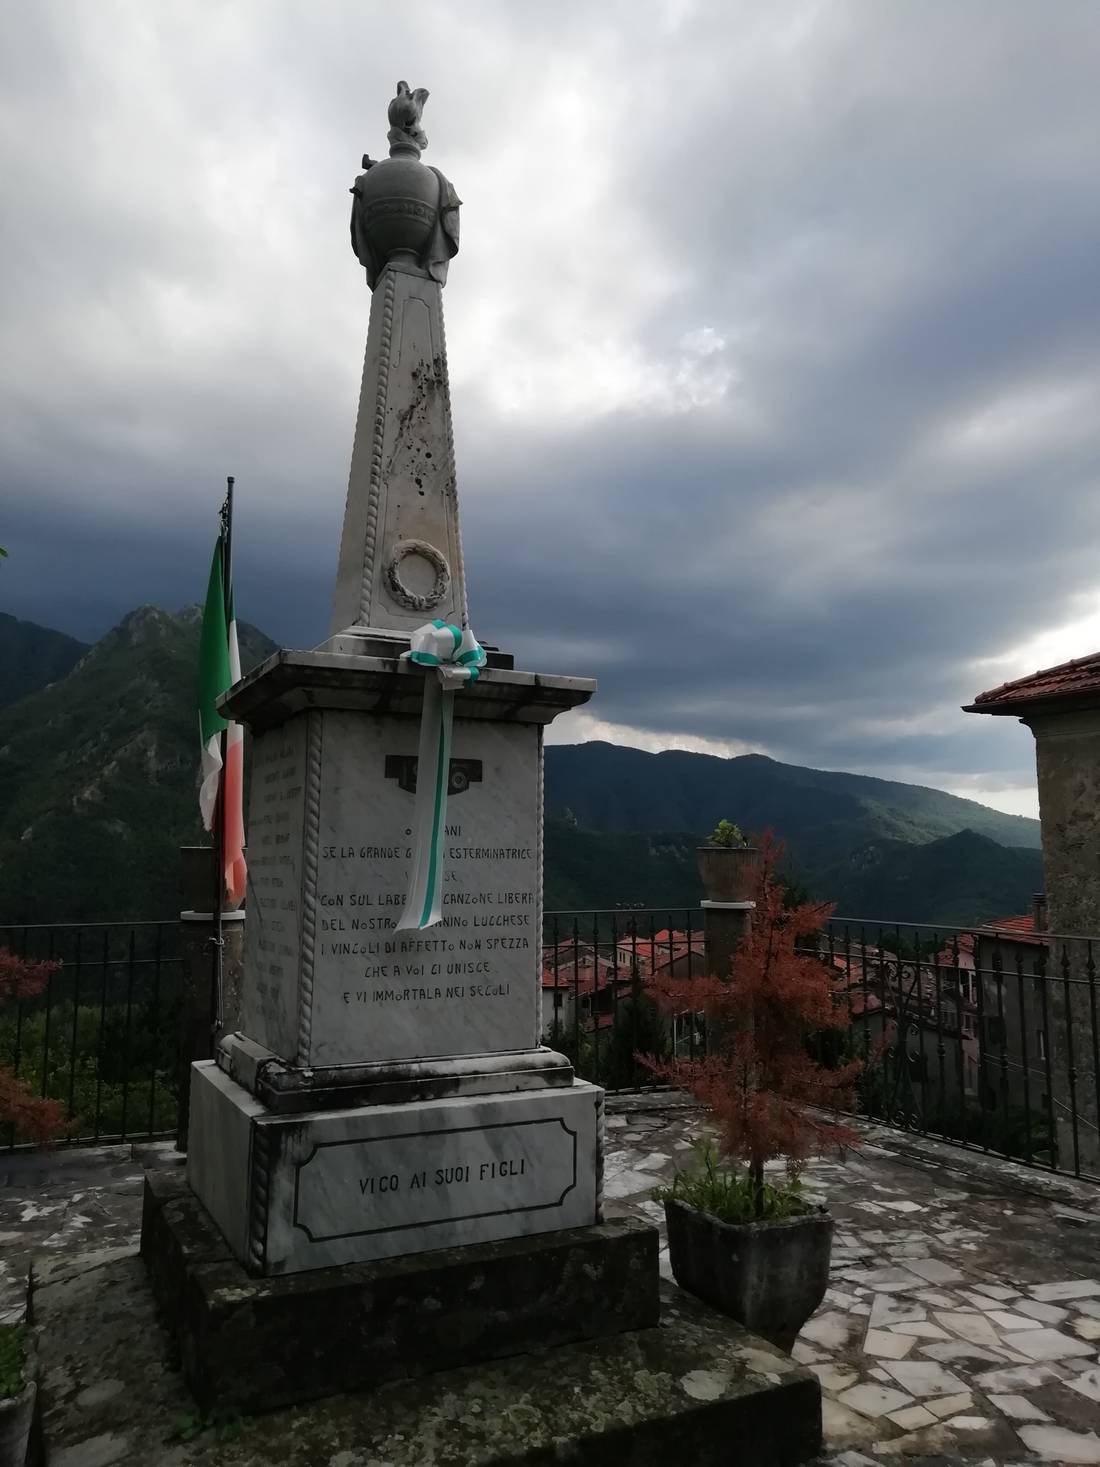 In the middle of the trekking street way a monument to the people from vico pancellorum dead during the second world, in memory of them a charming monument and a charming view, really an impressive moment stop in from of it and stare at it with the mountains behind